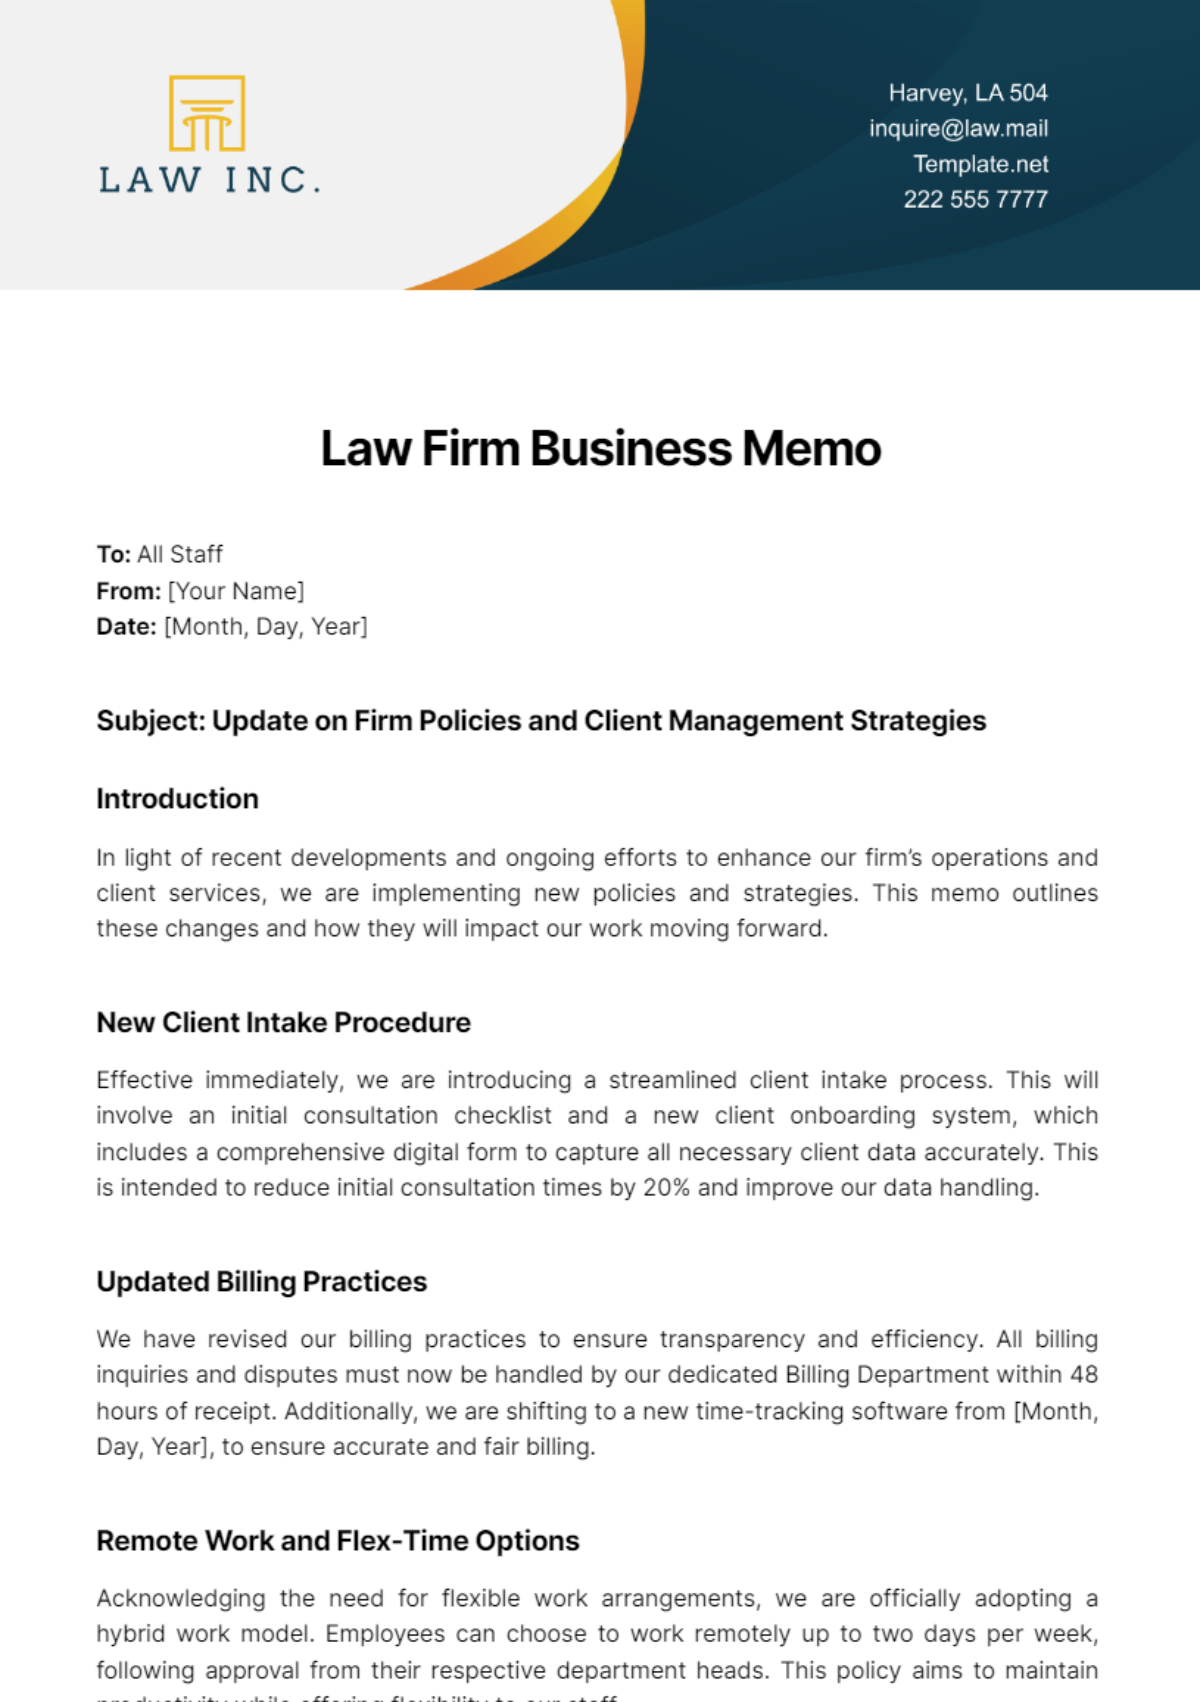 Law Firm Business Memo Template